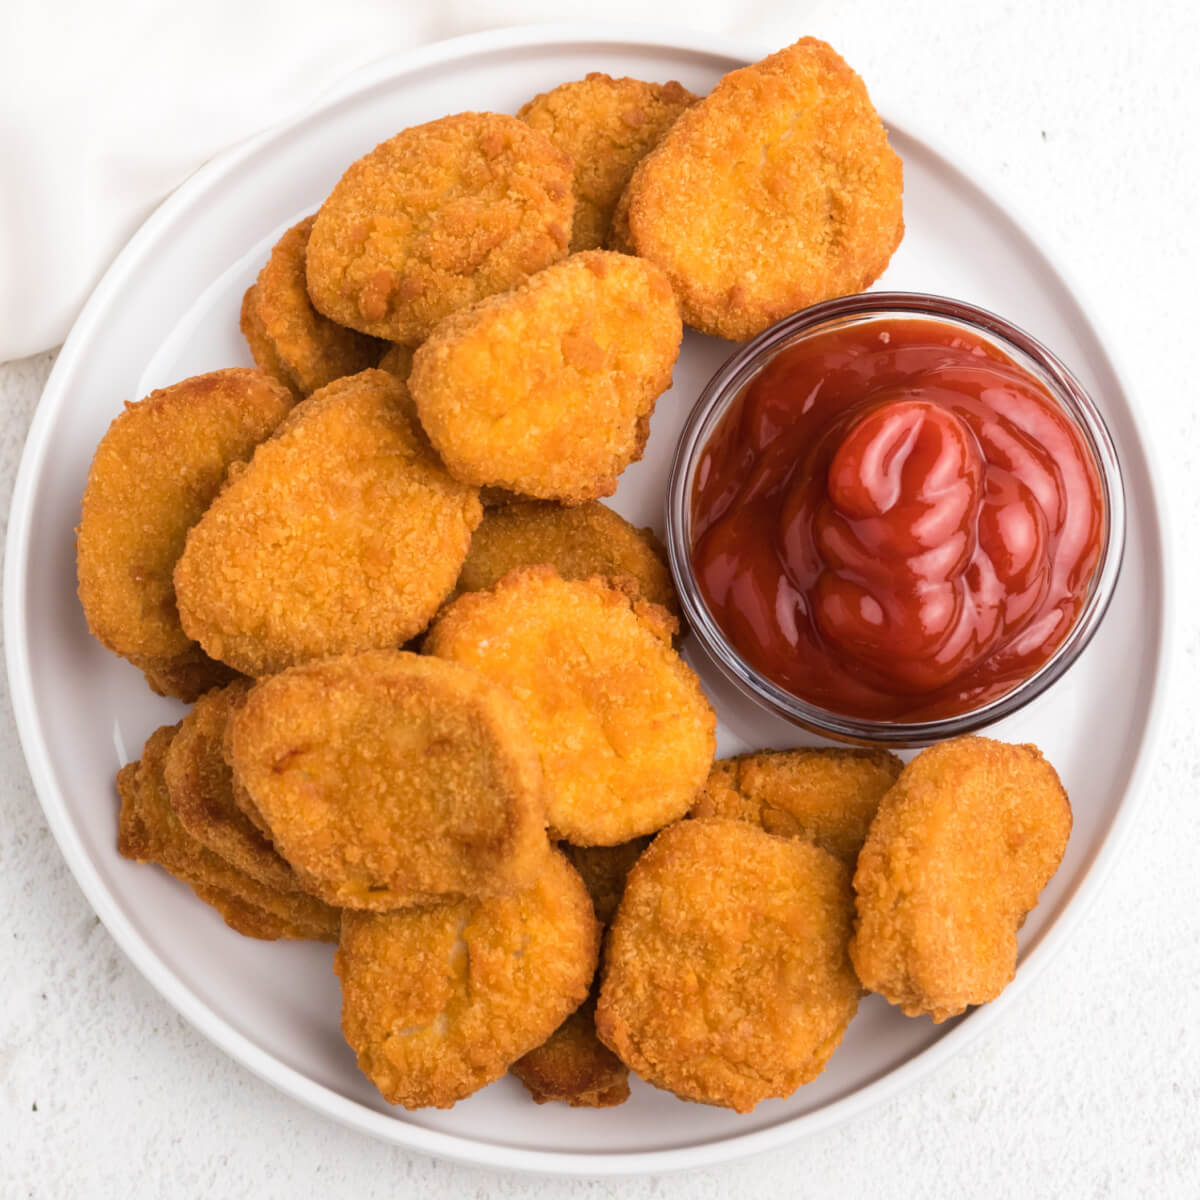 How to air fry Great Value Breaded Chicken Nuggets – Air Fry Guide